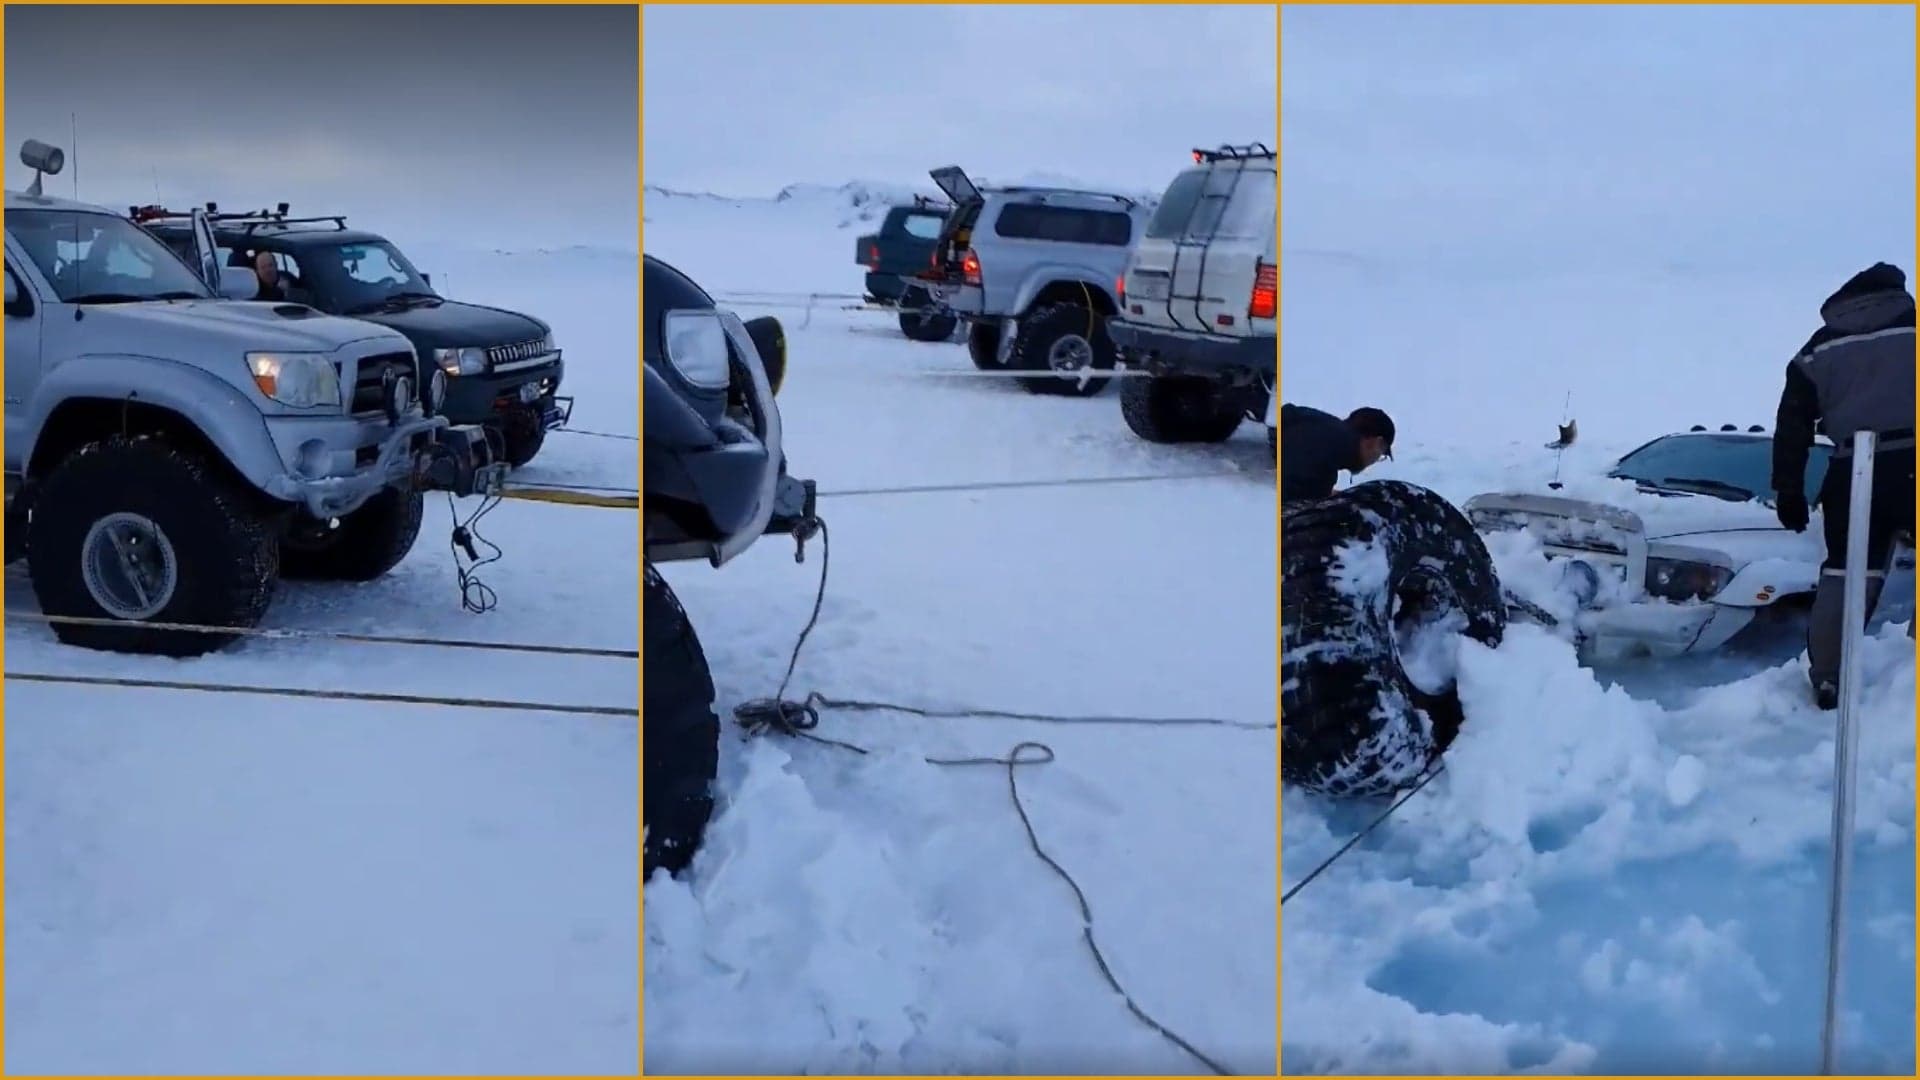 Watch These Icelandic Off-Roaders Use a Genius Strap System to Recover a Sunken Dodge Ram